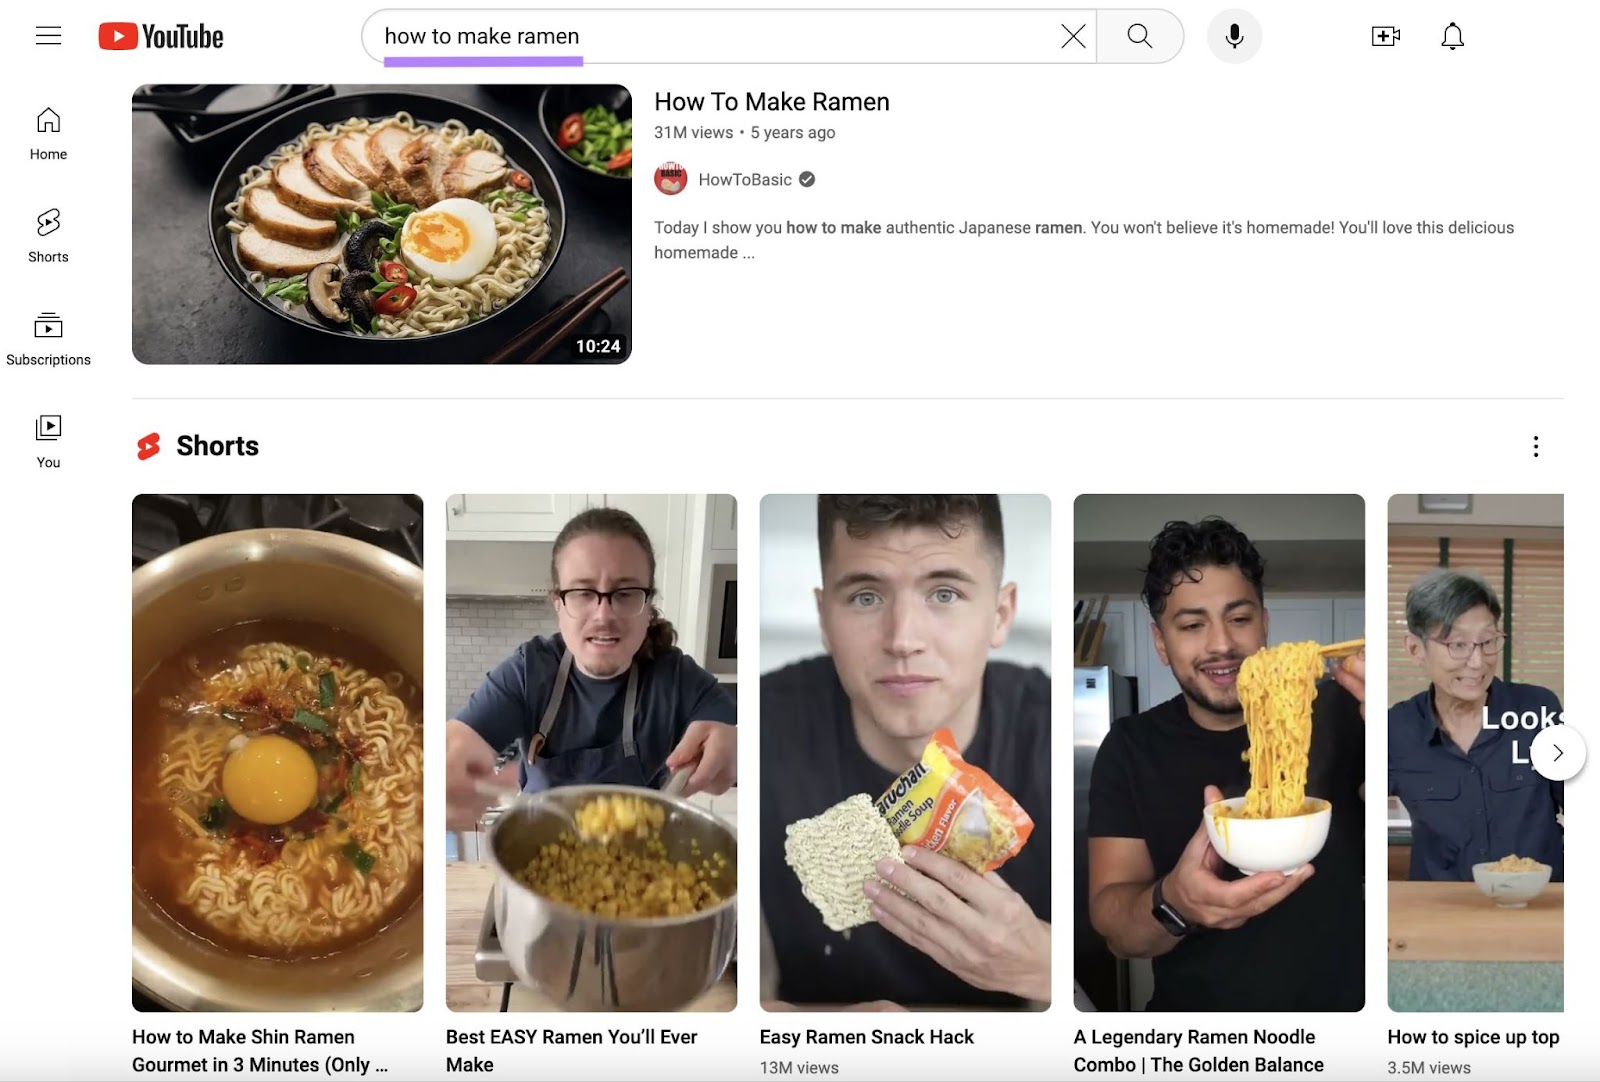 YouTube search results for "how to make ramen"